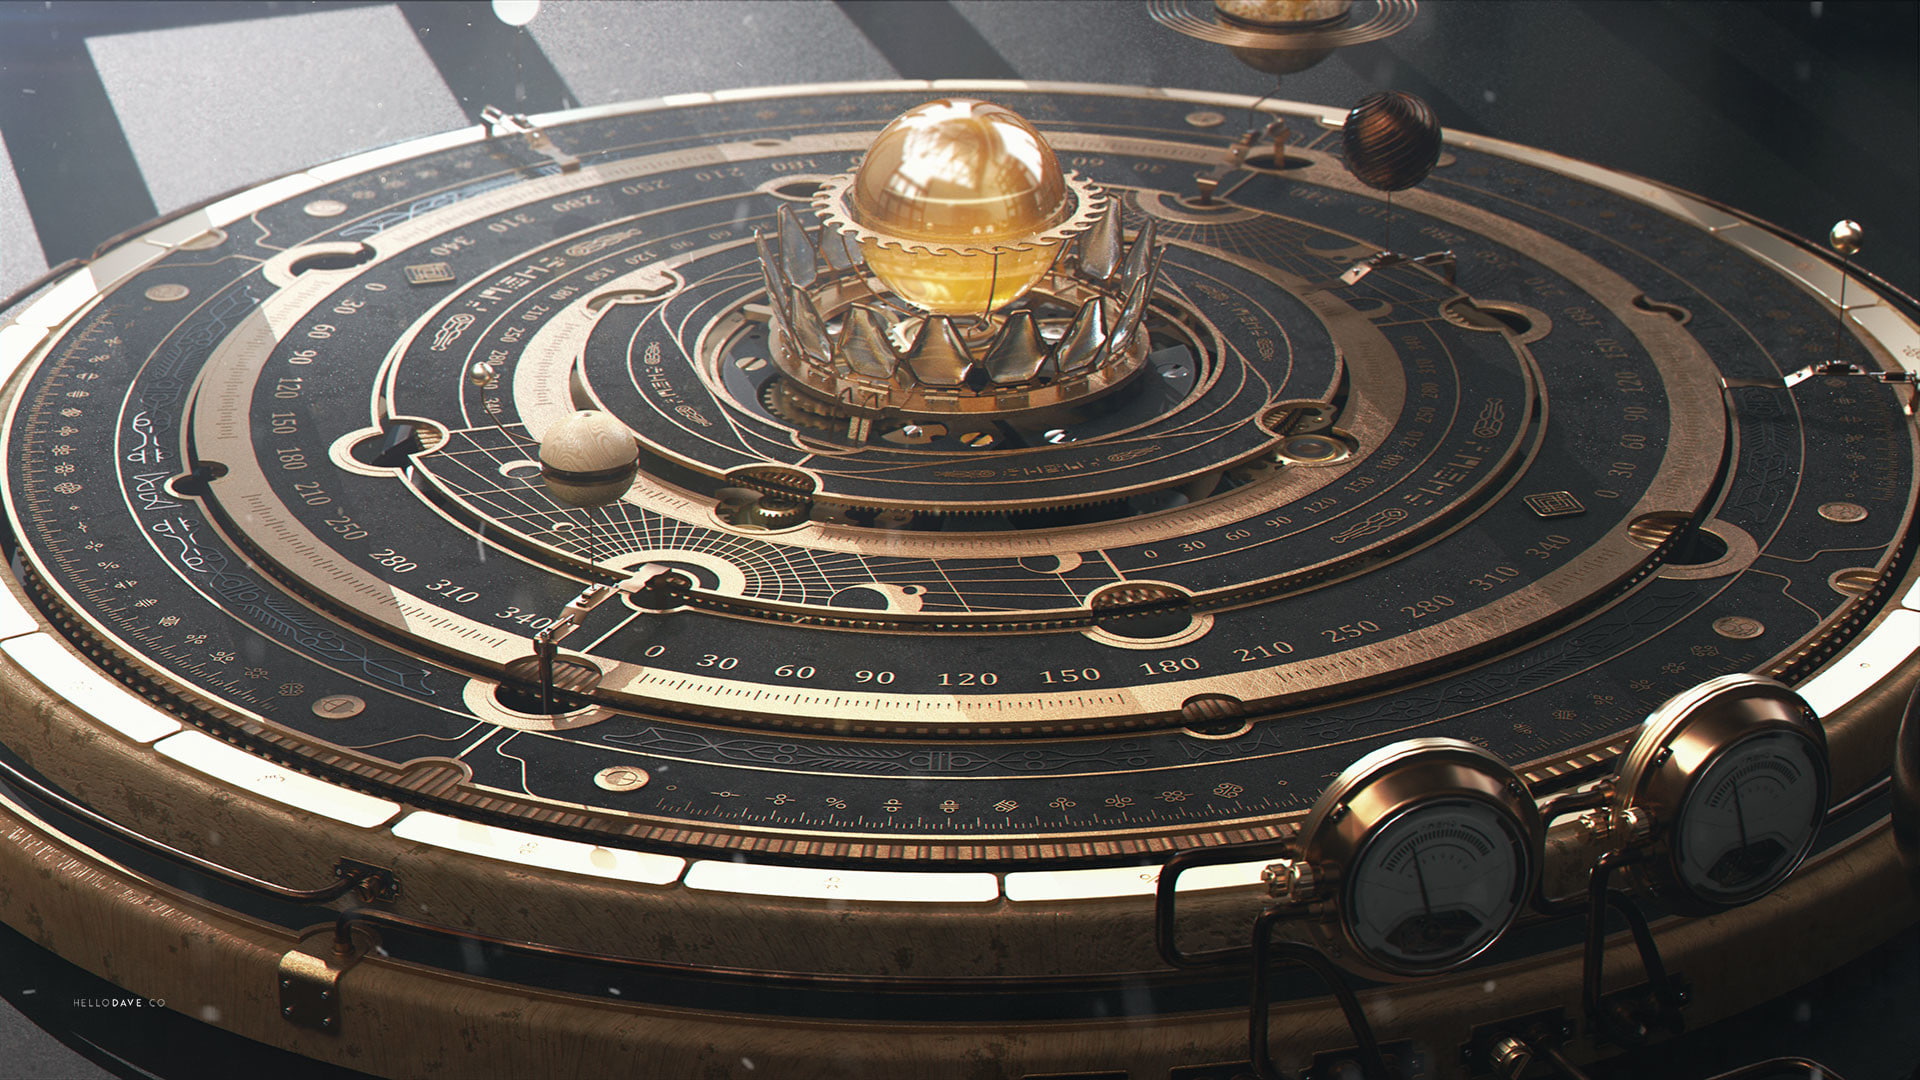 HD Wallpaper Astrolabe Steampunk Pla Astronomy No People